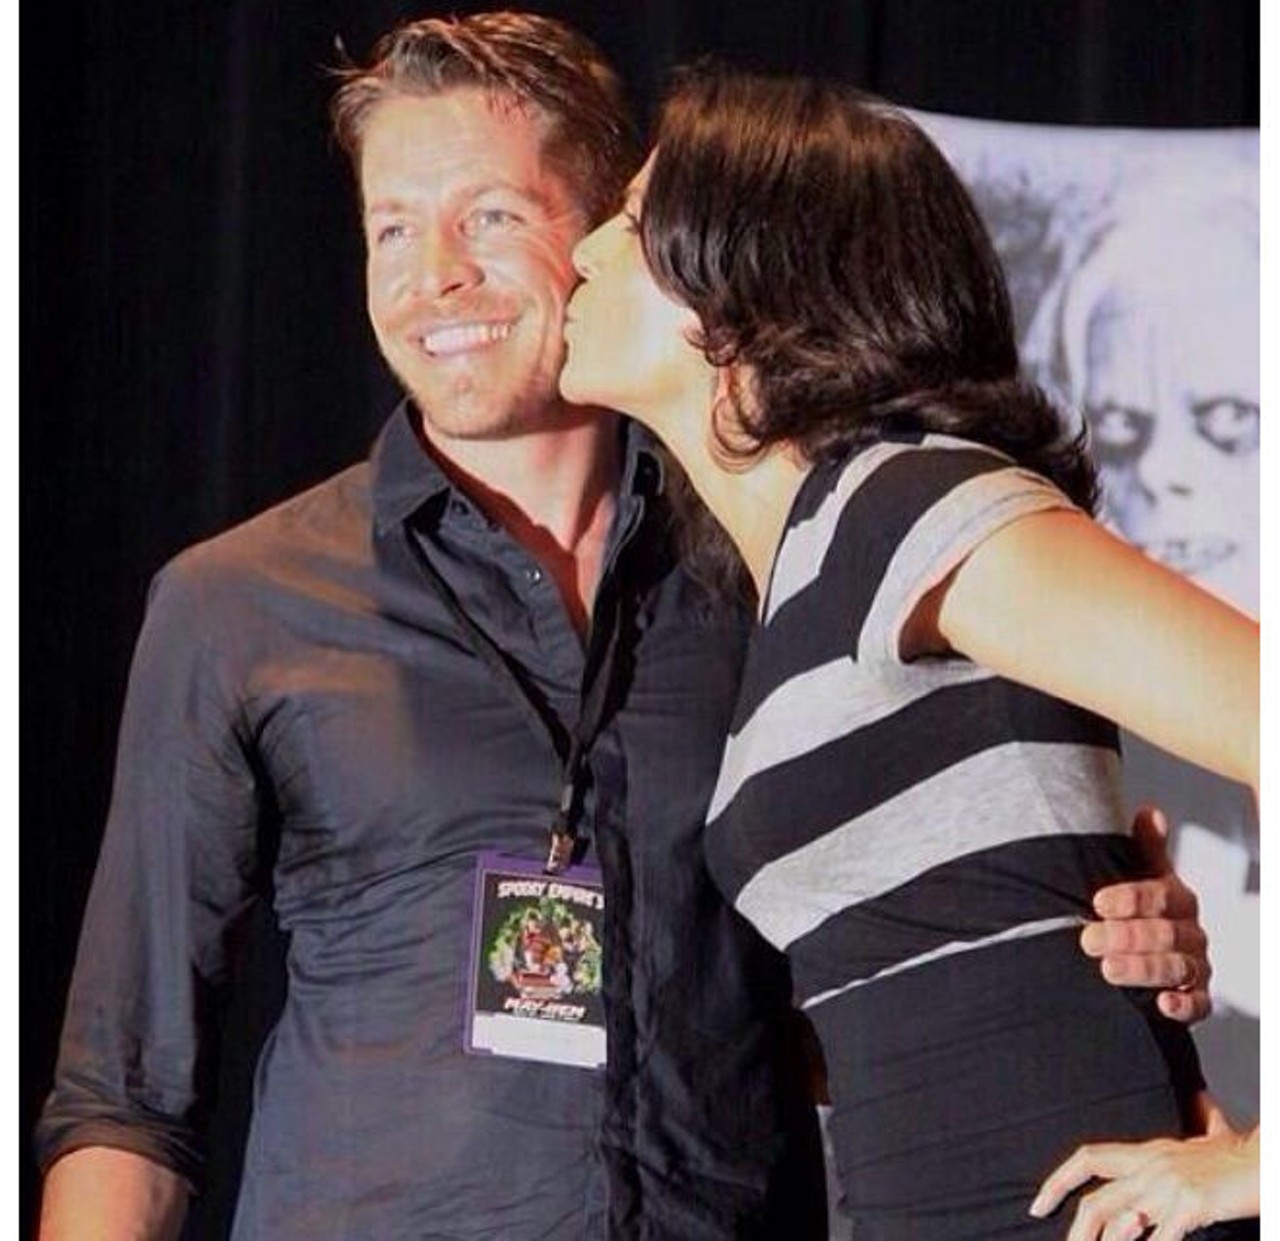 Lana Parrilla and Sean Maguire from Once Upon a Time.Instagram: rm_theevilqueen